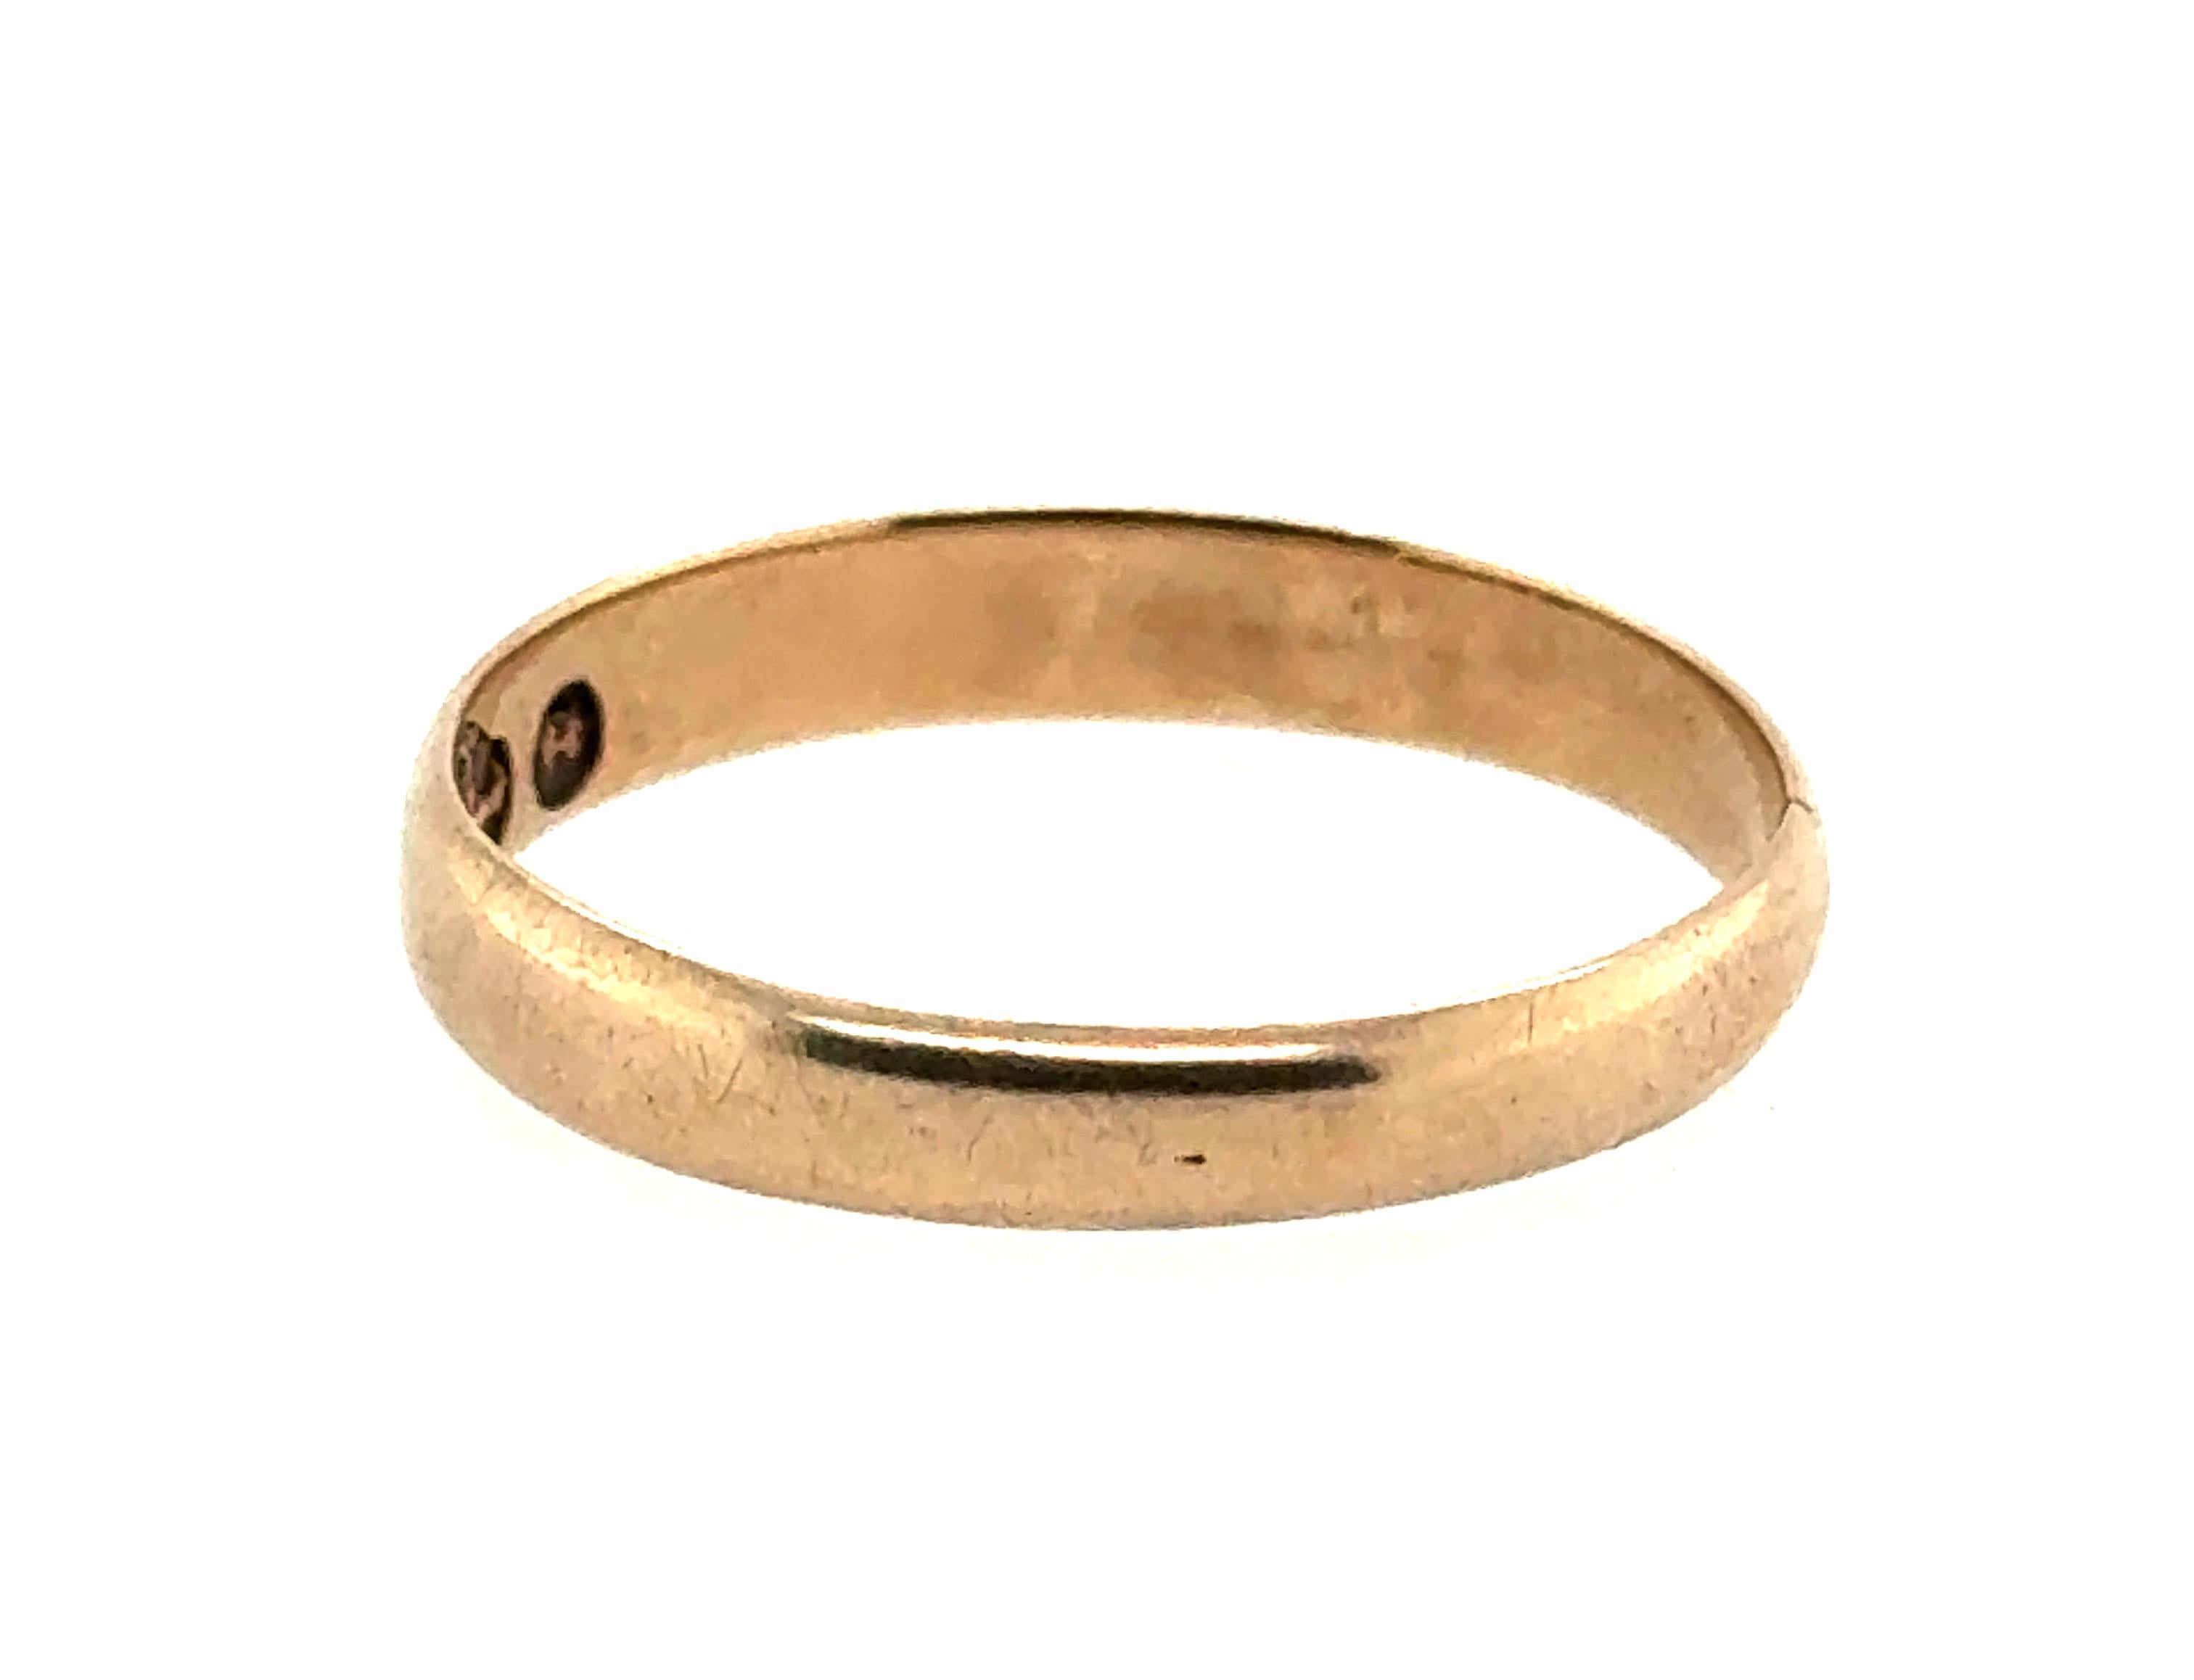 Genuine Original Antique from 1874 Victorian Wedding Band Ladies Vintage Antique Yellow Gold



Genuine Original Gold Wedding Ring Band Eternity Band

9K Yellow Gold

Trademarked Ring

Has Markings from the London Assay Office, Proving It's Age

The